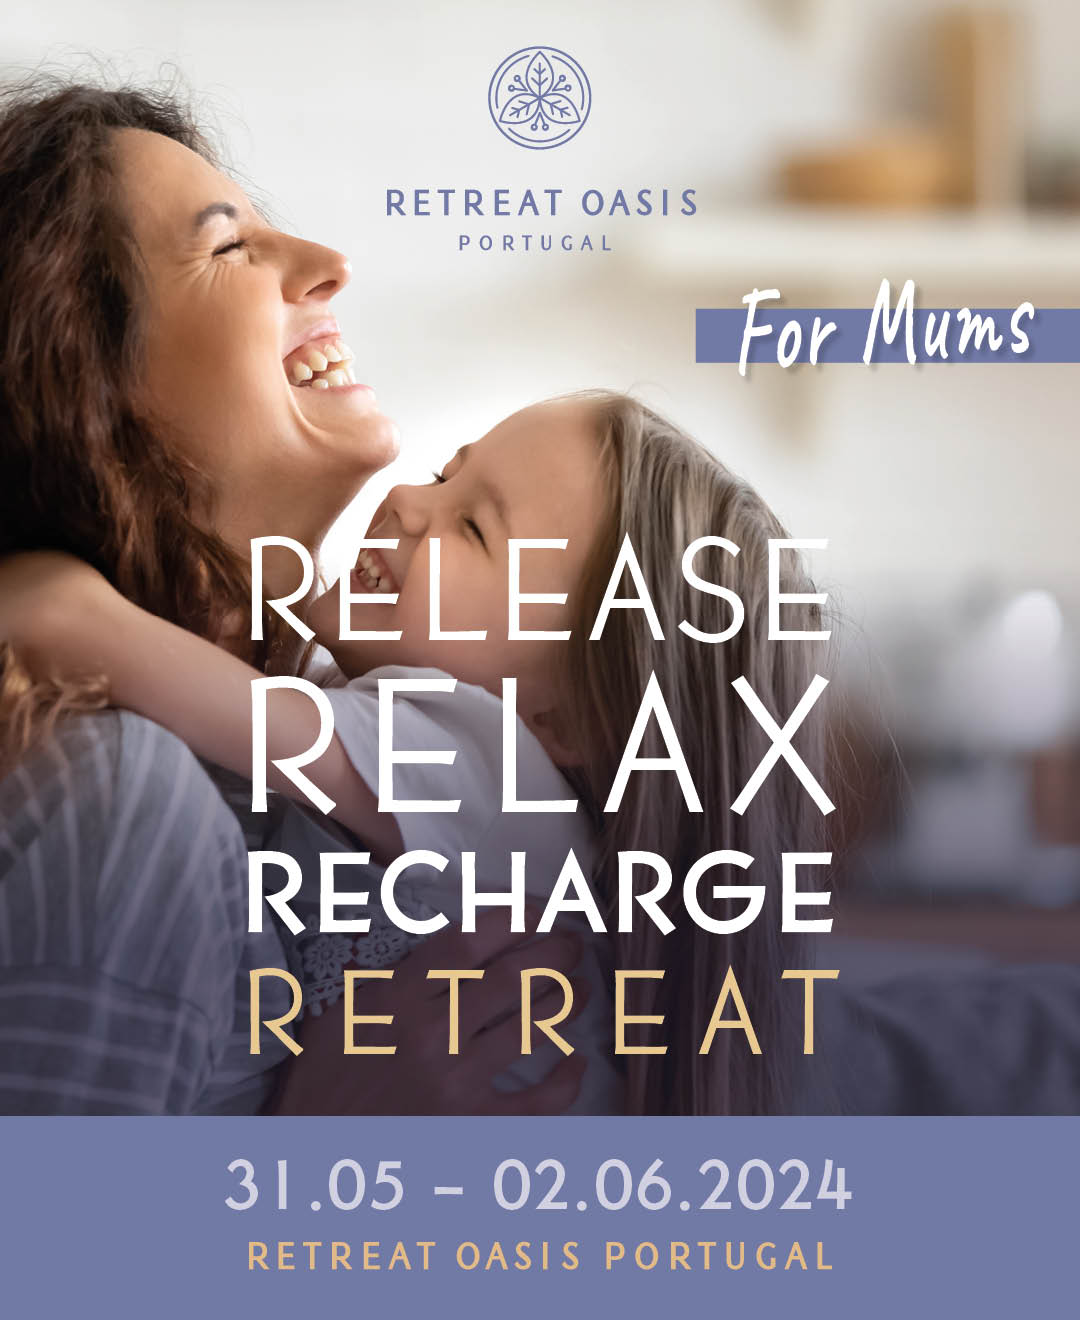 Weekend Retreat for Mums in Portugal 2024